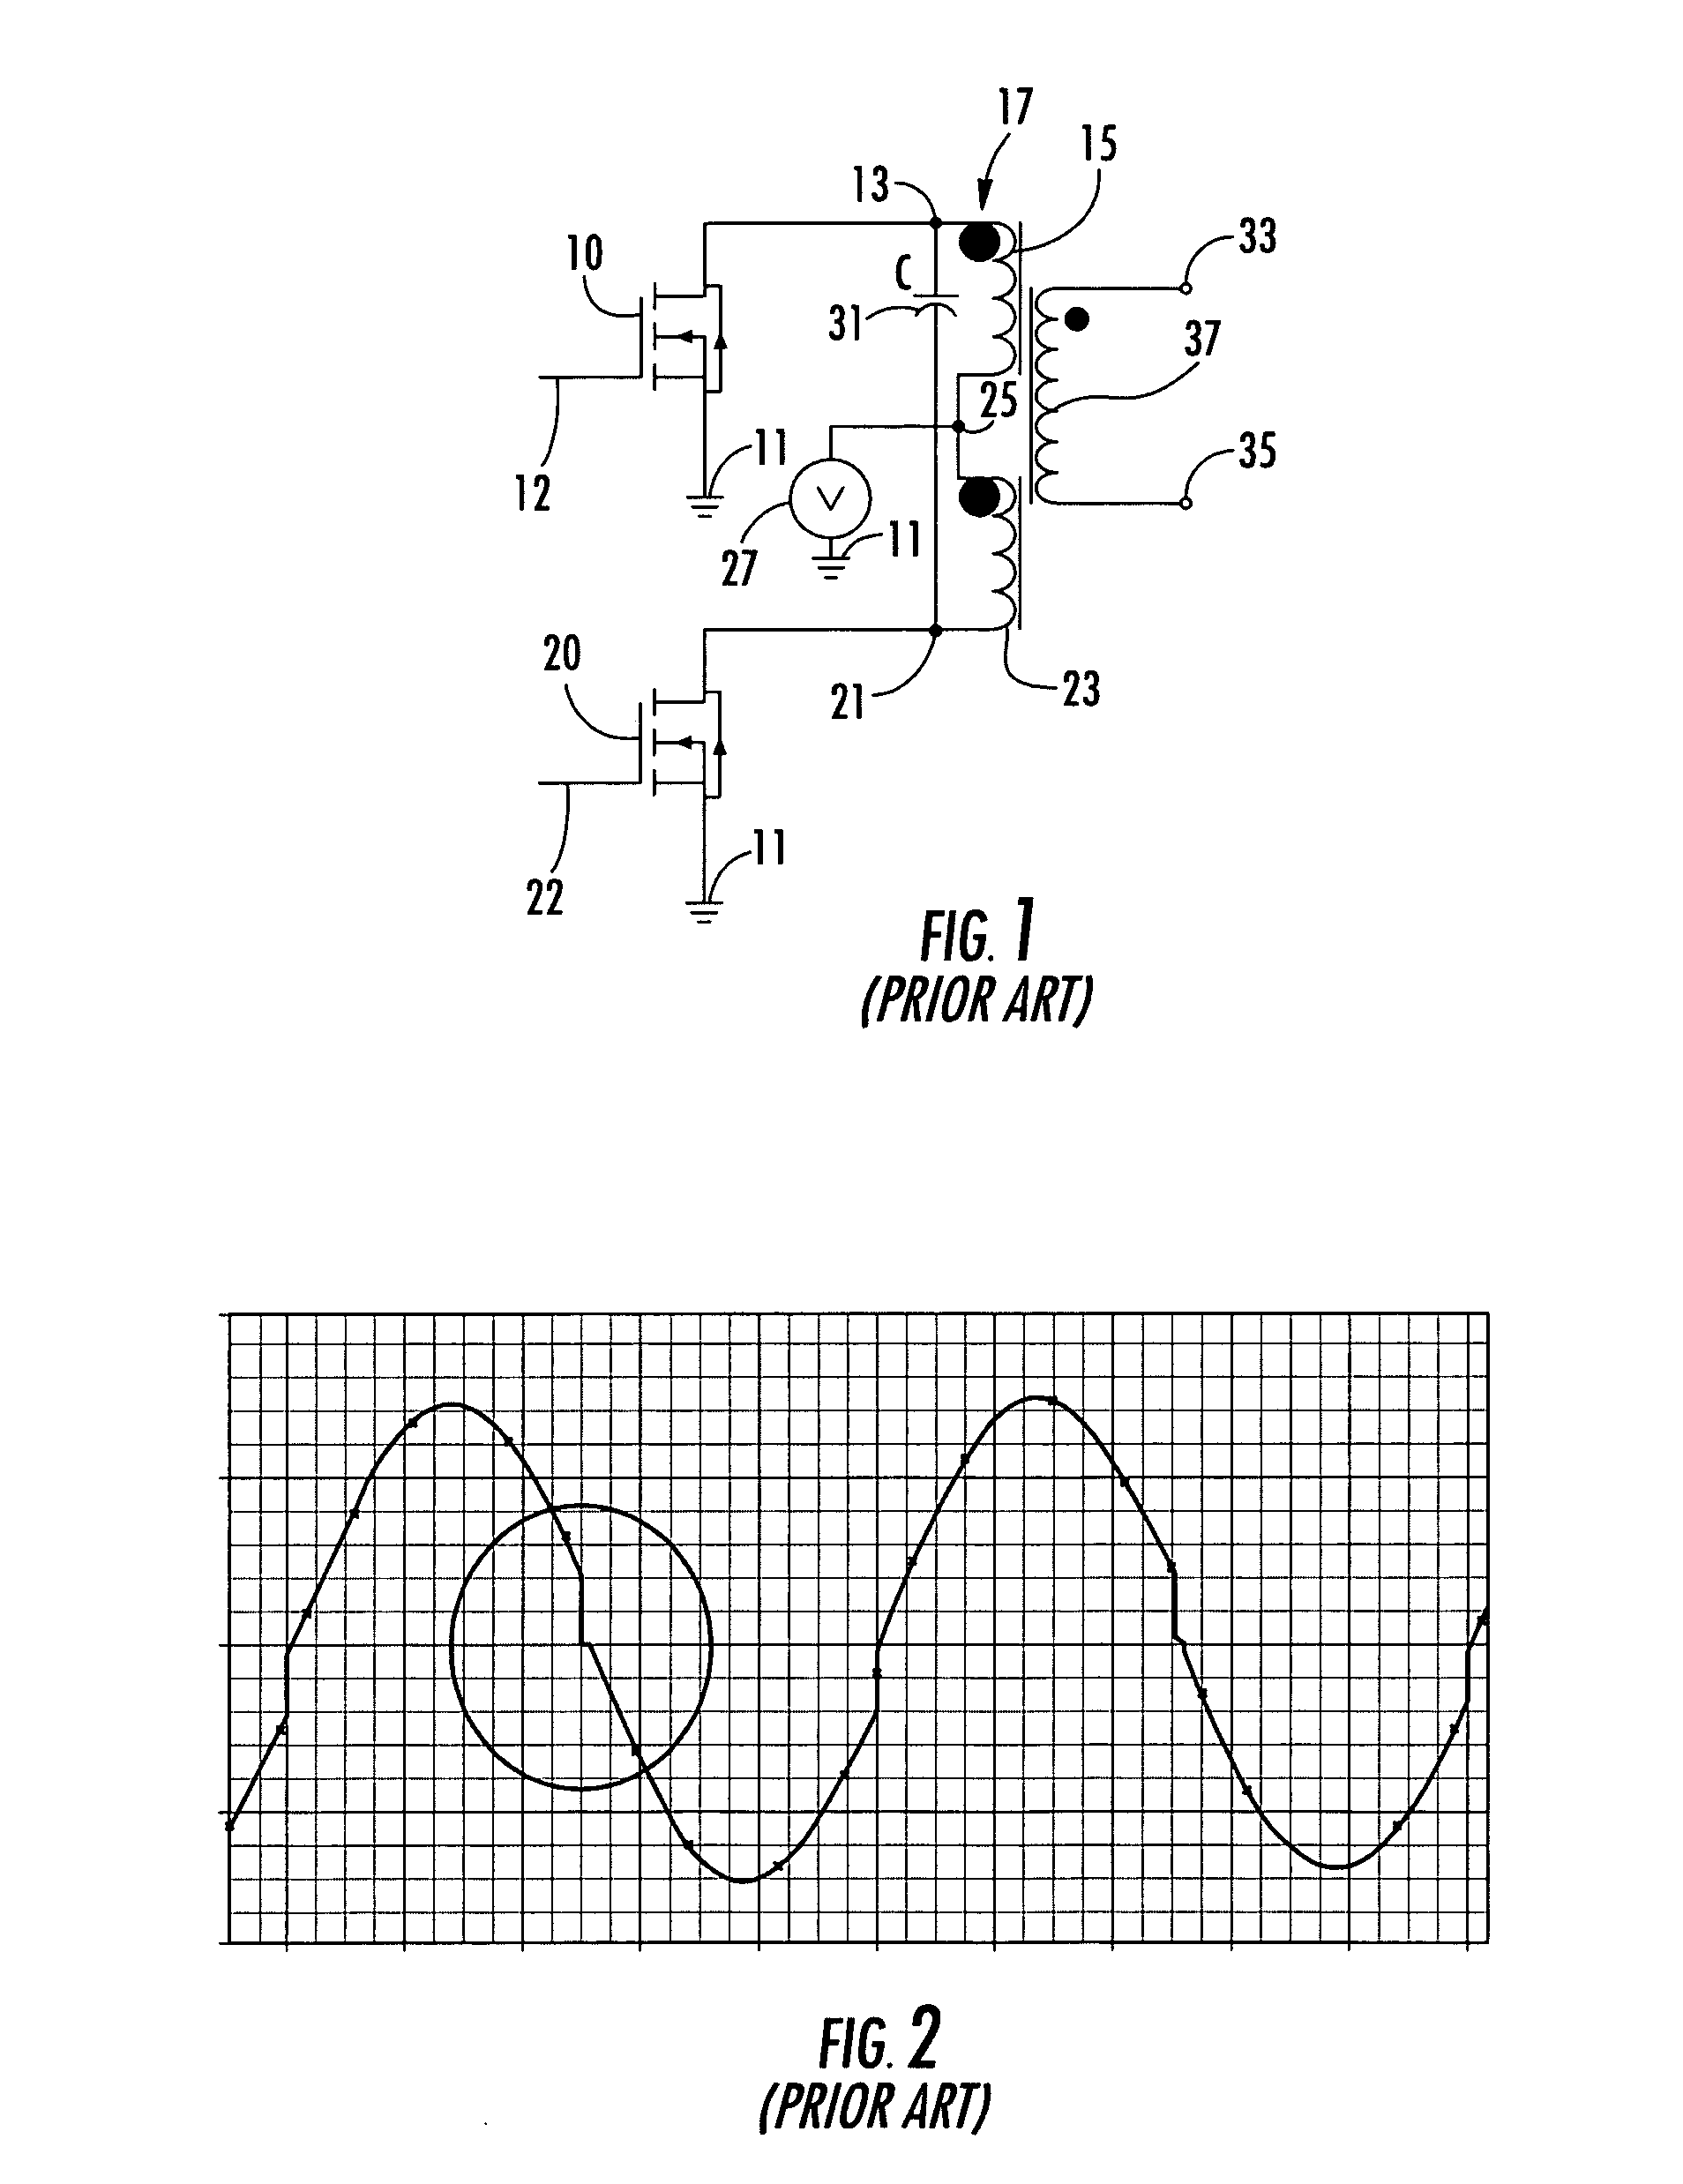 Architecture for achieving resonant circuit synchronization of multiple zero voltage switched push-pull DC-ac converters